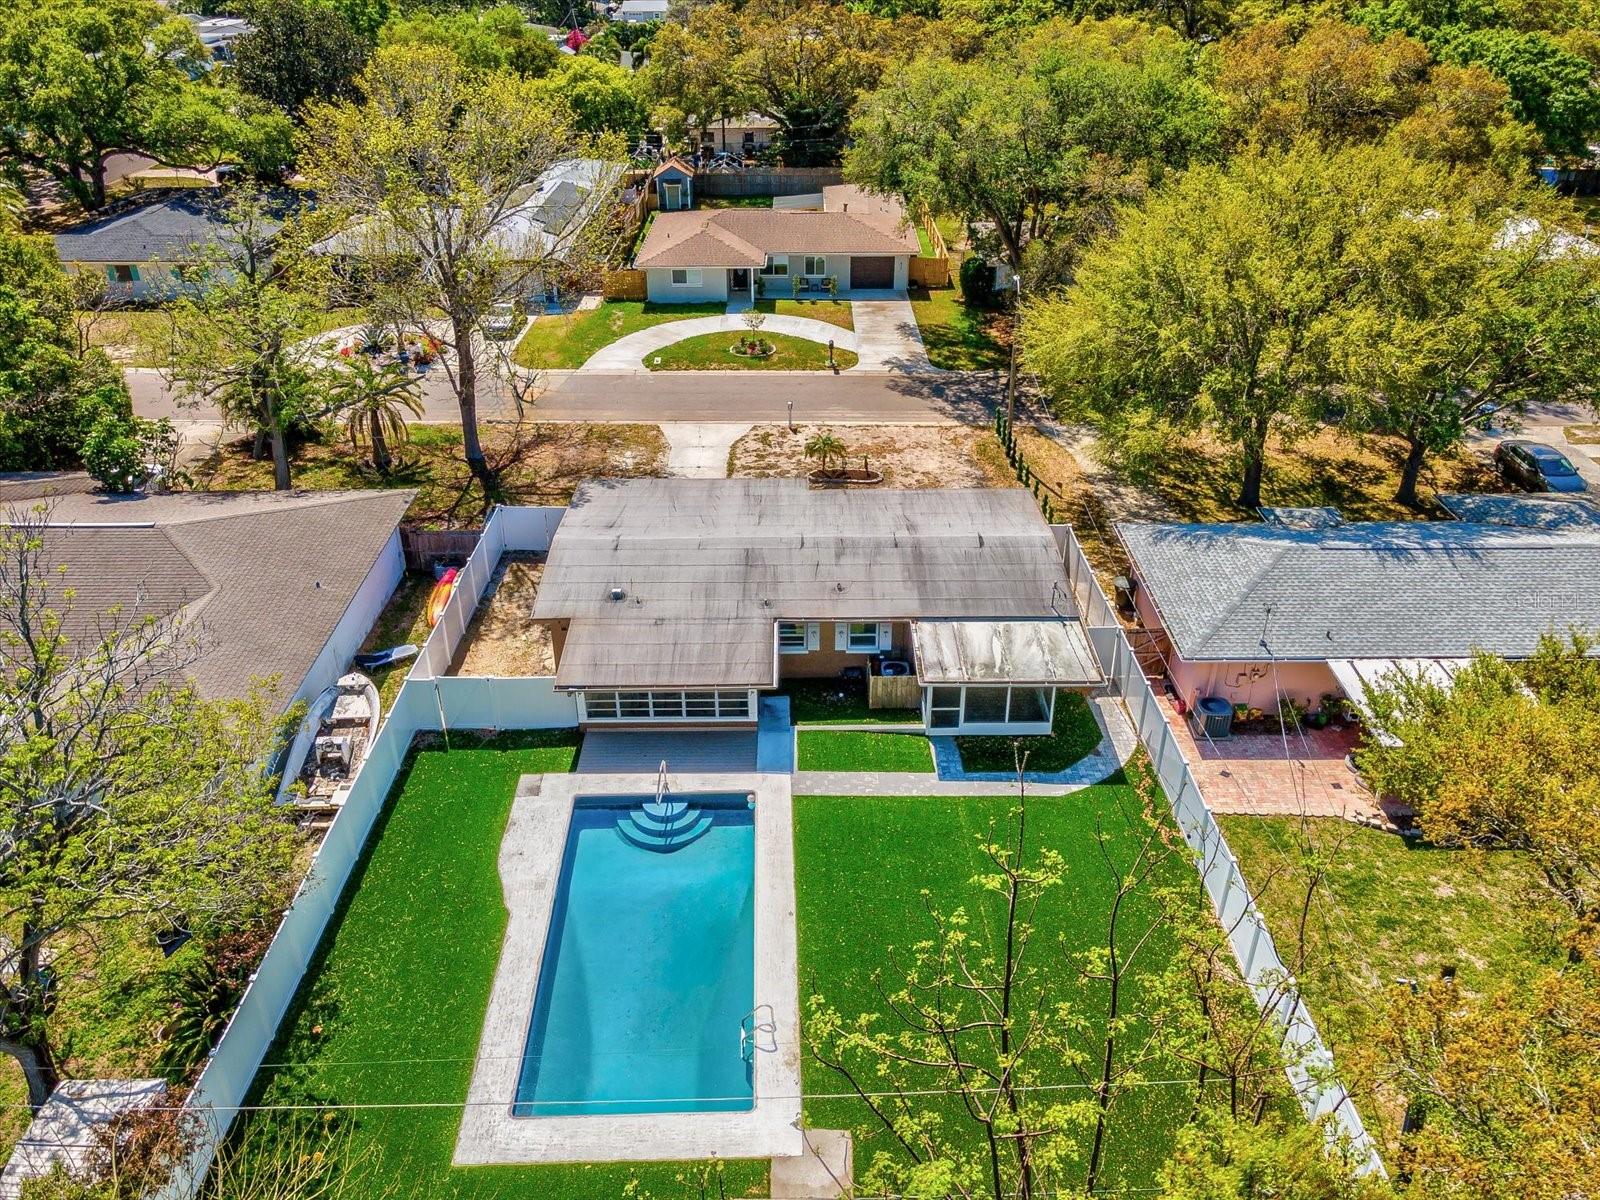 Drone View of Yard and Pool